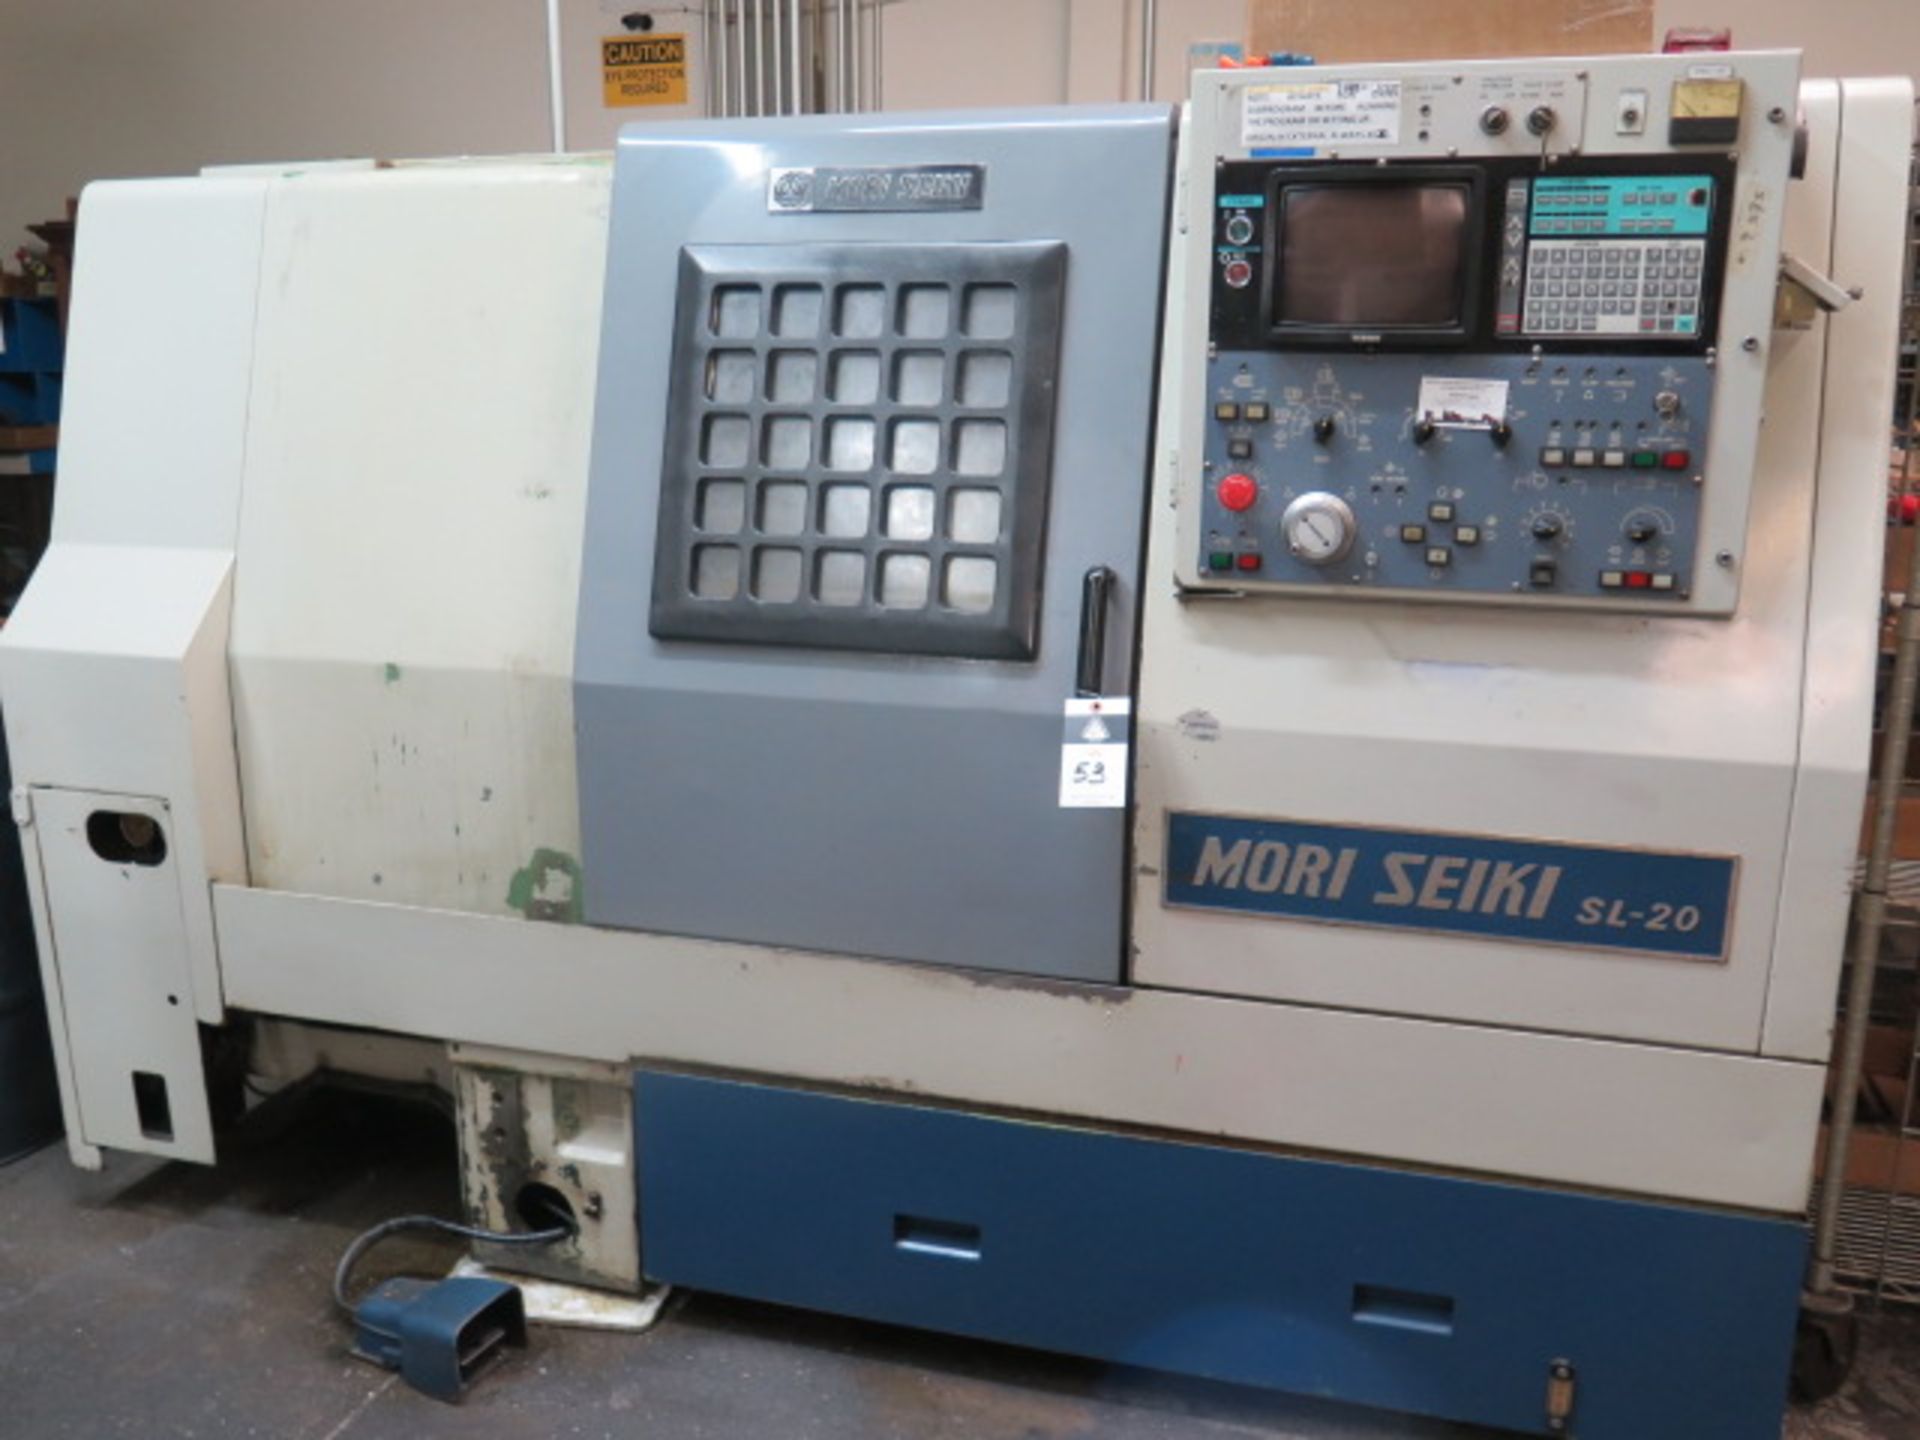 Mori Seiki SL-20 CNC Turning Center s/n 7 w/ Yasnac Controls, 10-Station Turret, SOLD AS IS